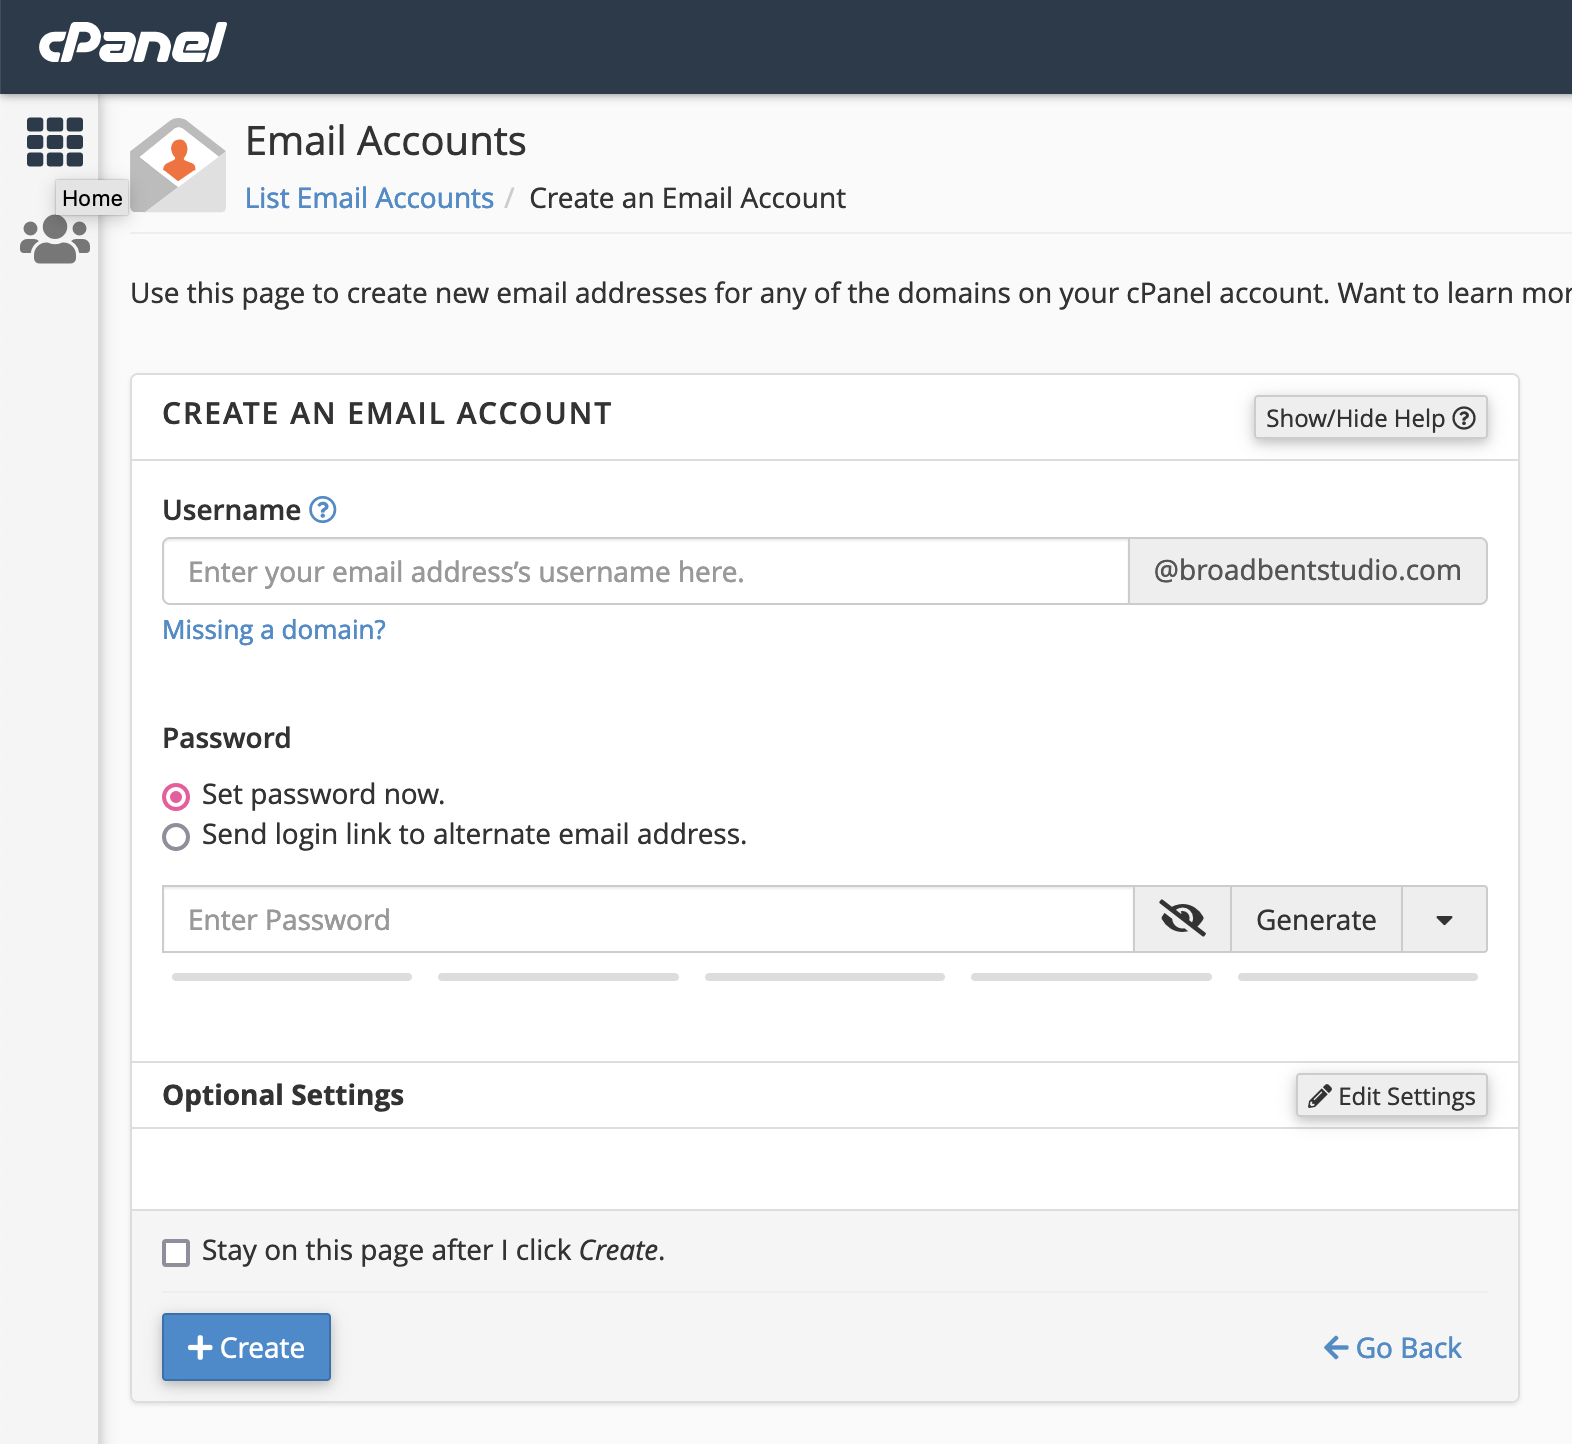 Screenshot of cPanel to add an email account. Showing textbox to add custom domain email address and password.